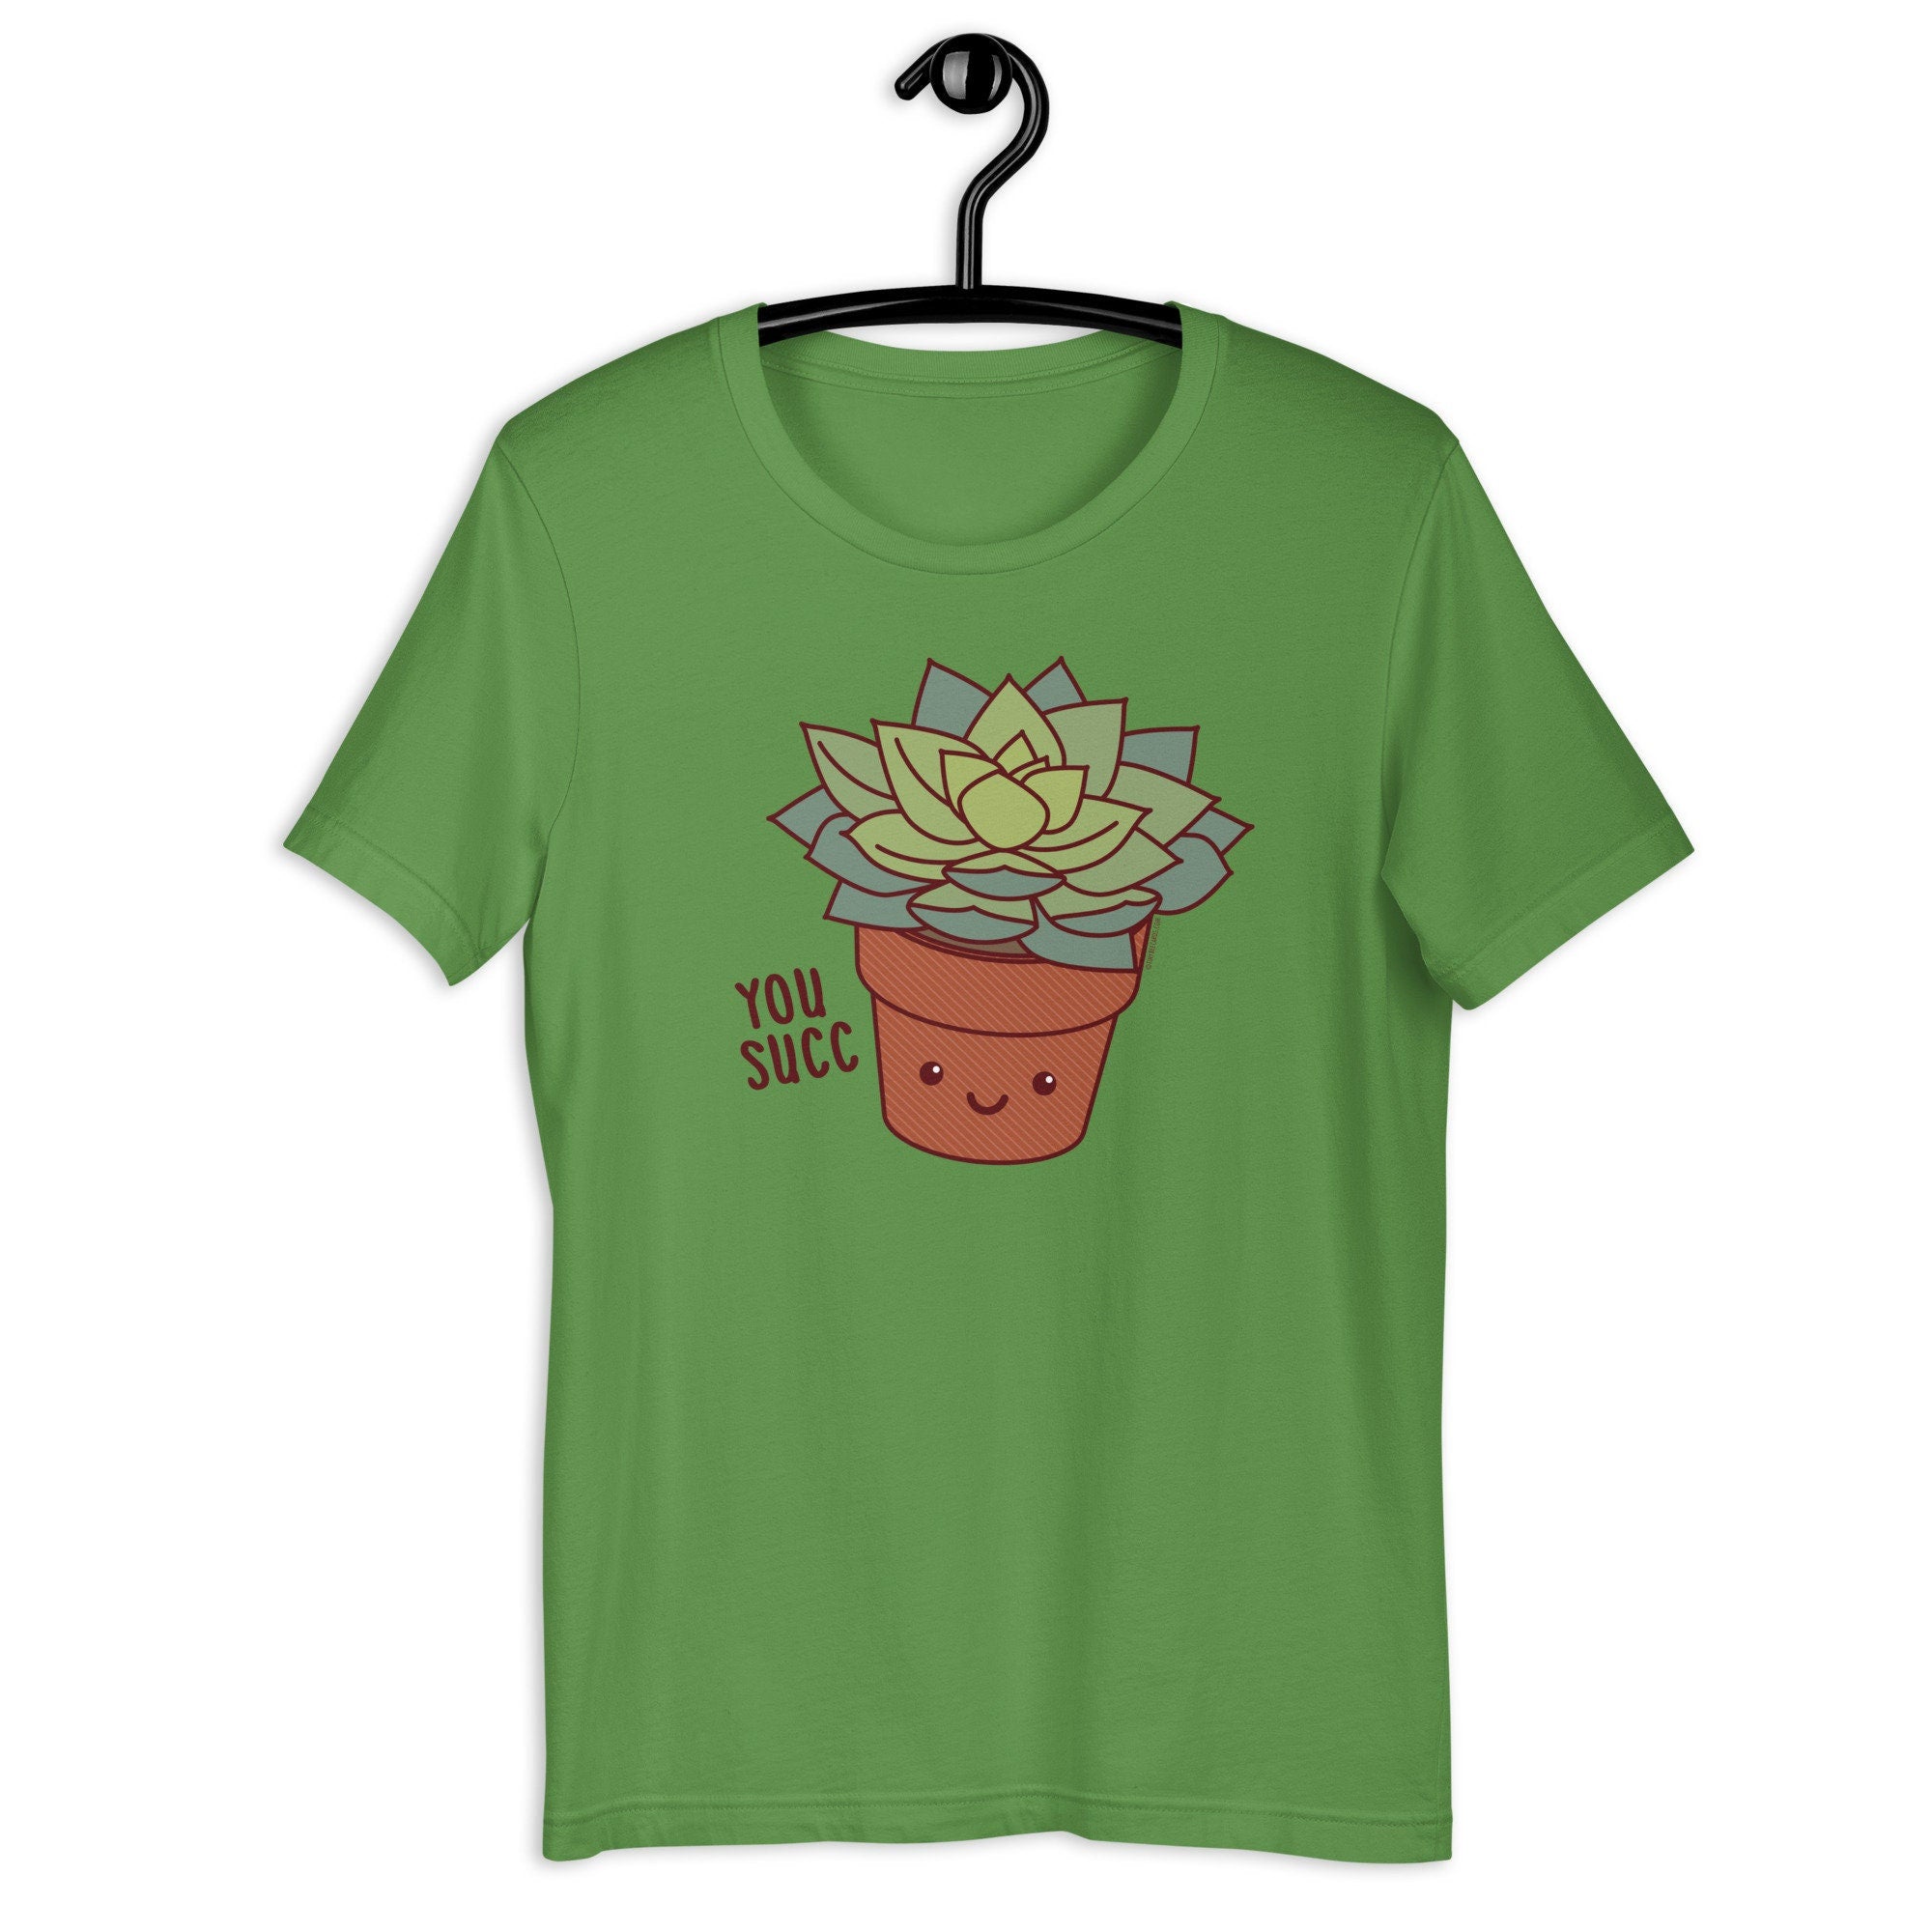 You Succ Succulent Plant Triblend Tee - funny t-shirt, plant lover tee, plant lady gift, introvert gift, graphic tees, men's women's shirts